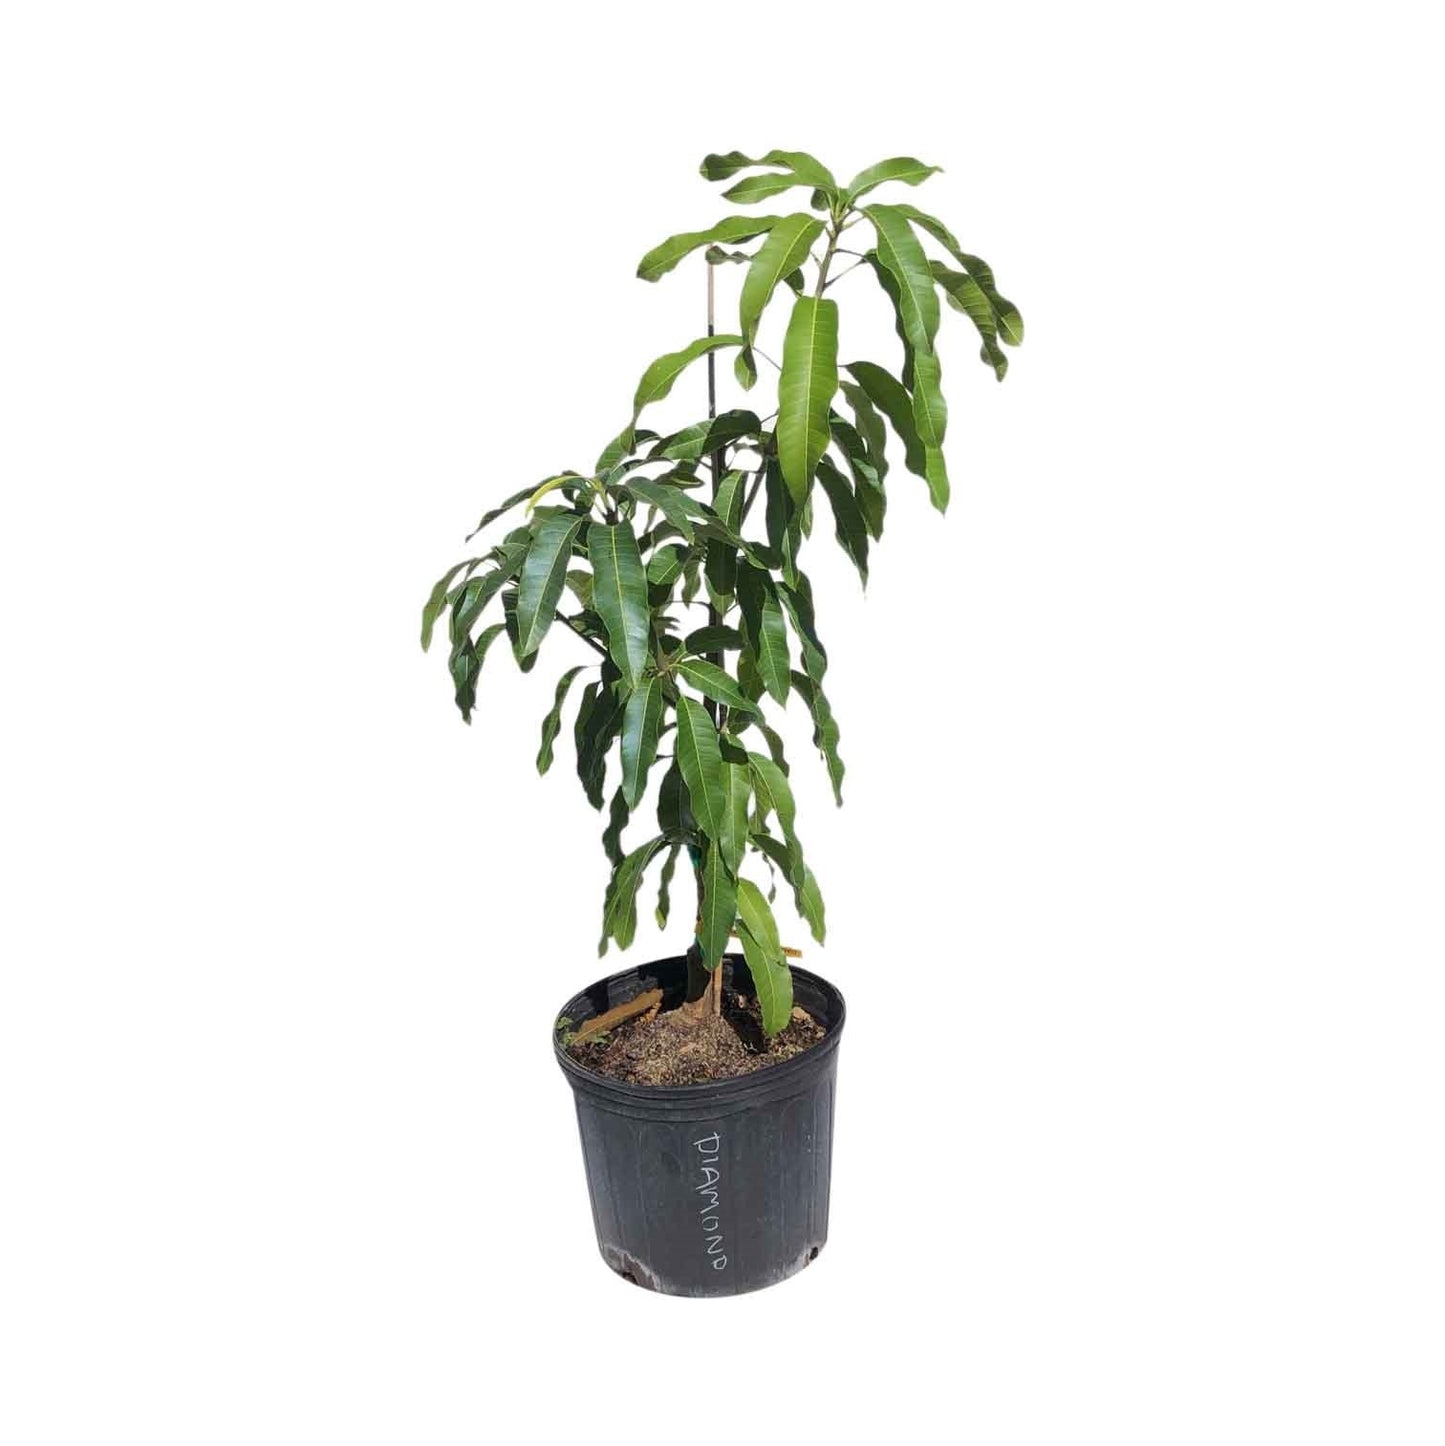 Atolfo Mango Tree, Grafted, 3 Gal Container from Florida